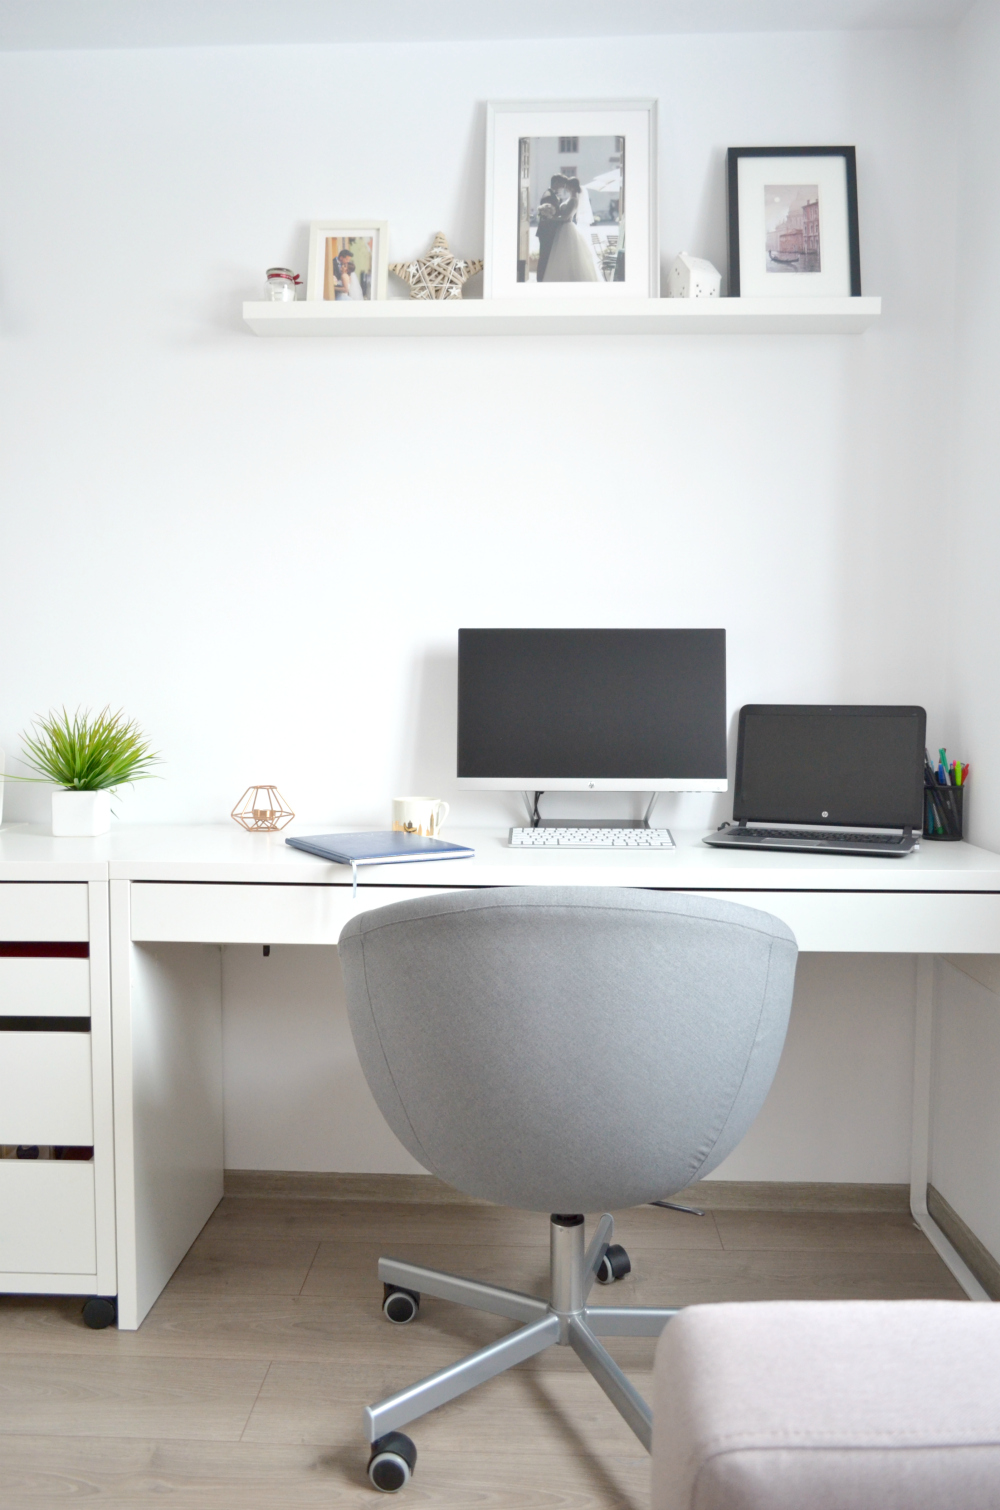 7 Tips to Decorate an IKEA Home Office - Cappuccino and Fashion